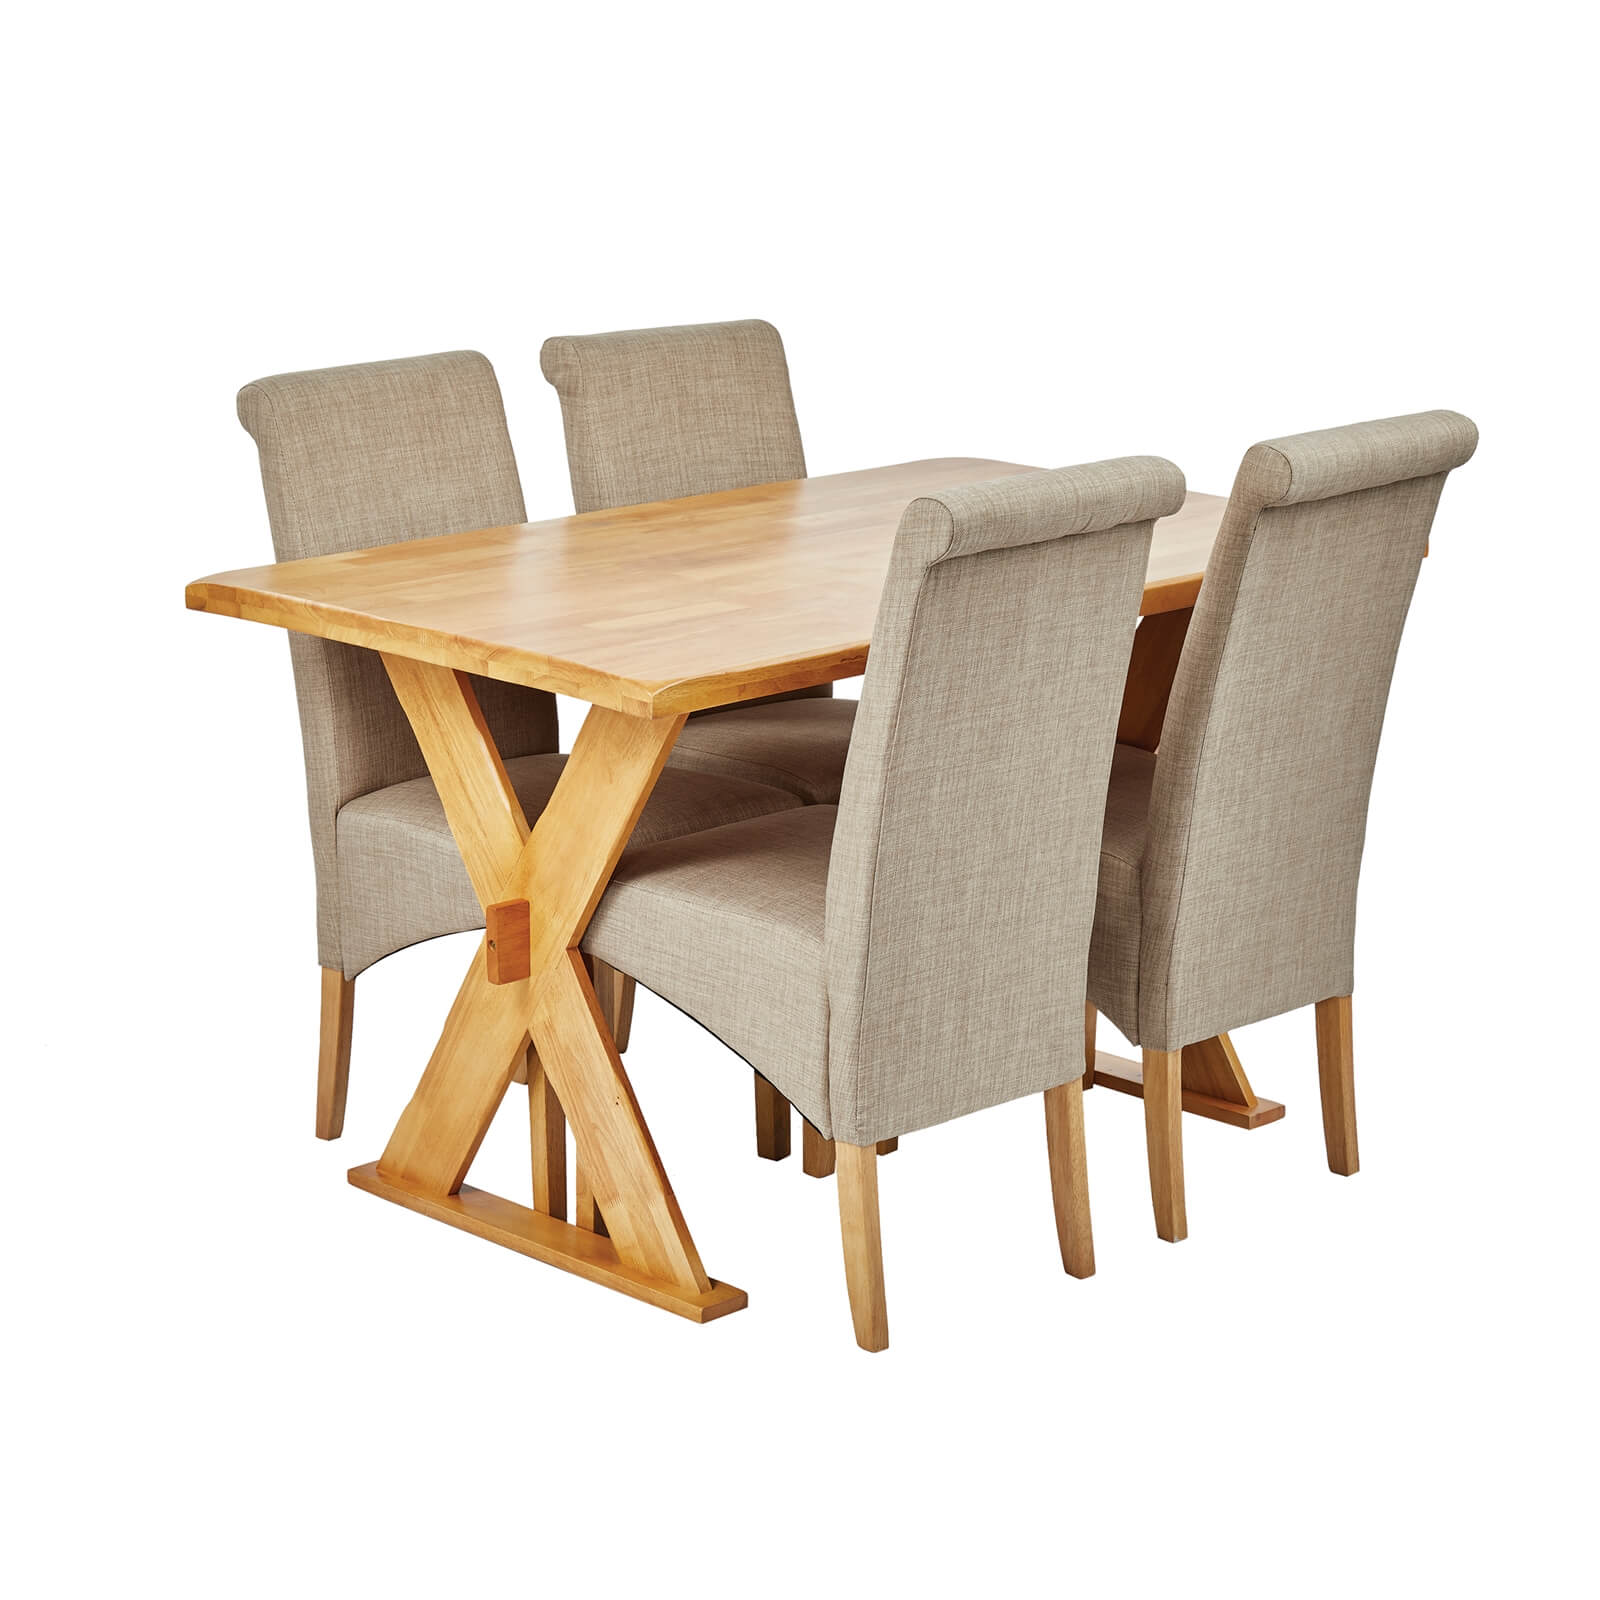 Seville 4 Seater Dining Set - Amelia Dining Chairs - Beige